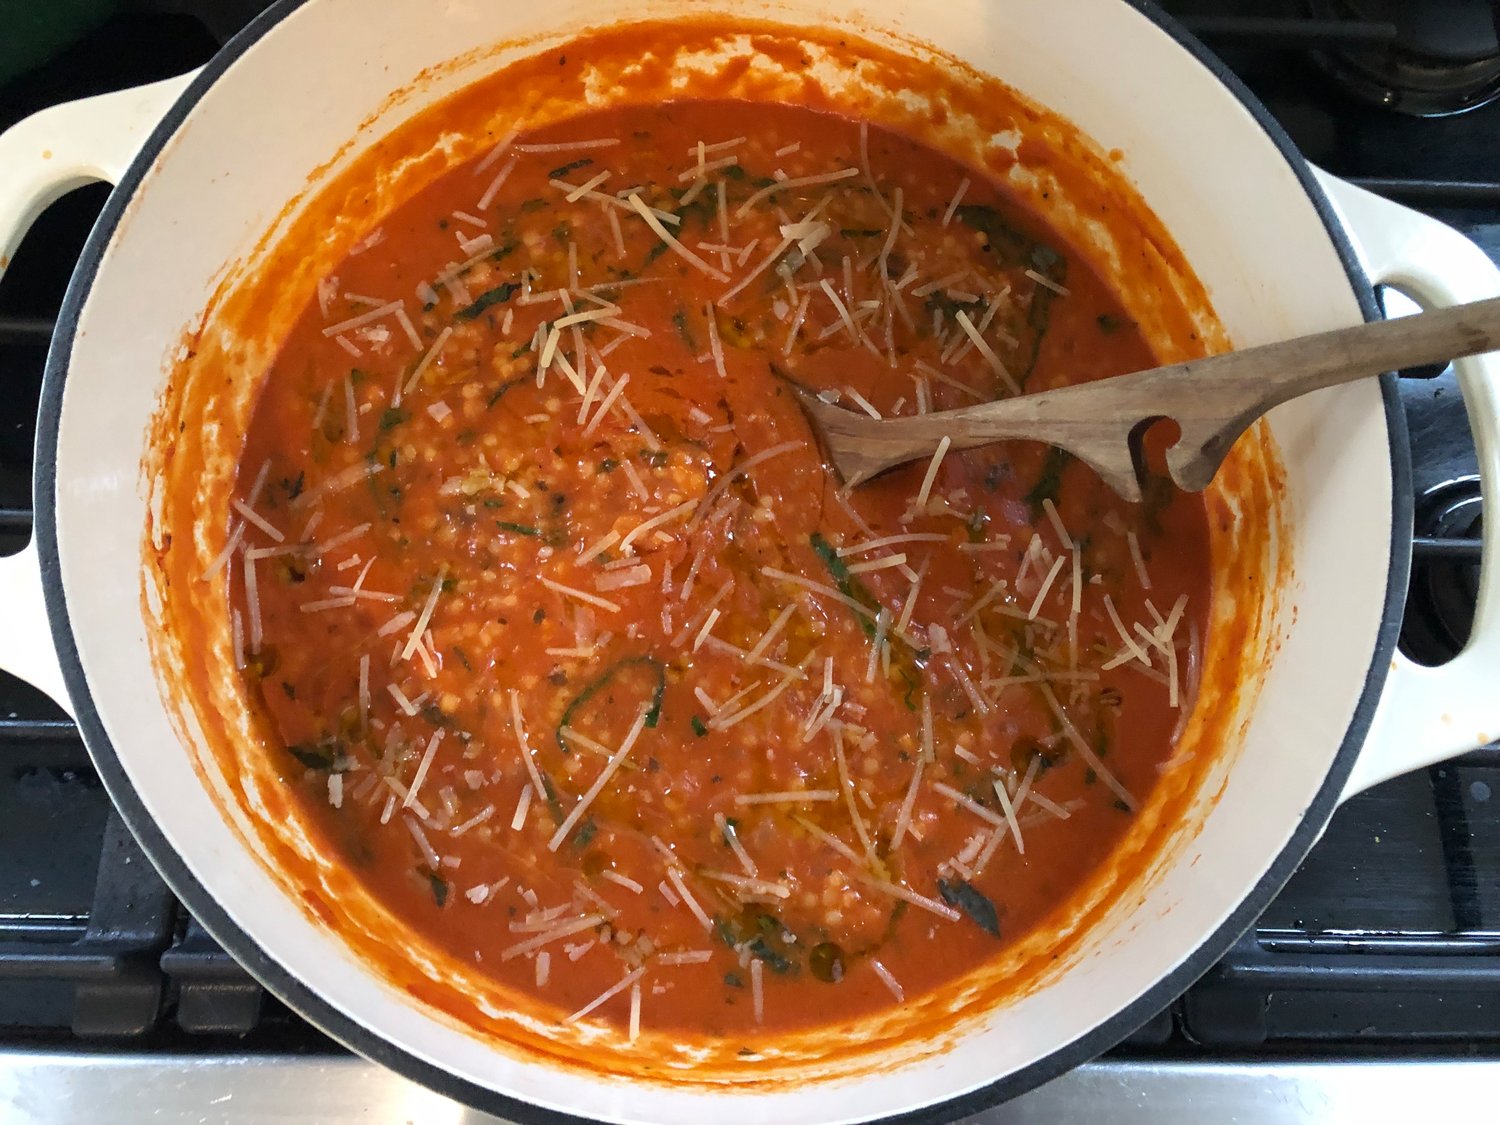 Pastina adds a texturally soothing element to a big pot of homemade tomato soup on a cold winter’s day.